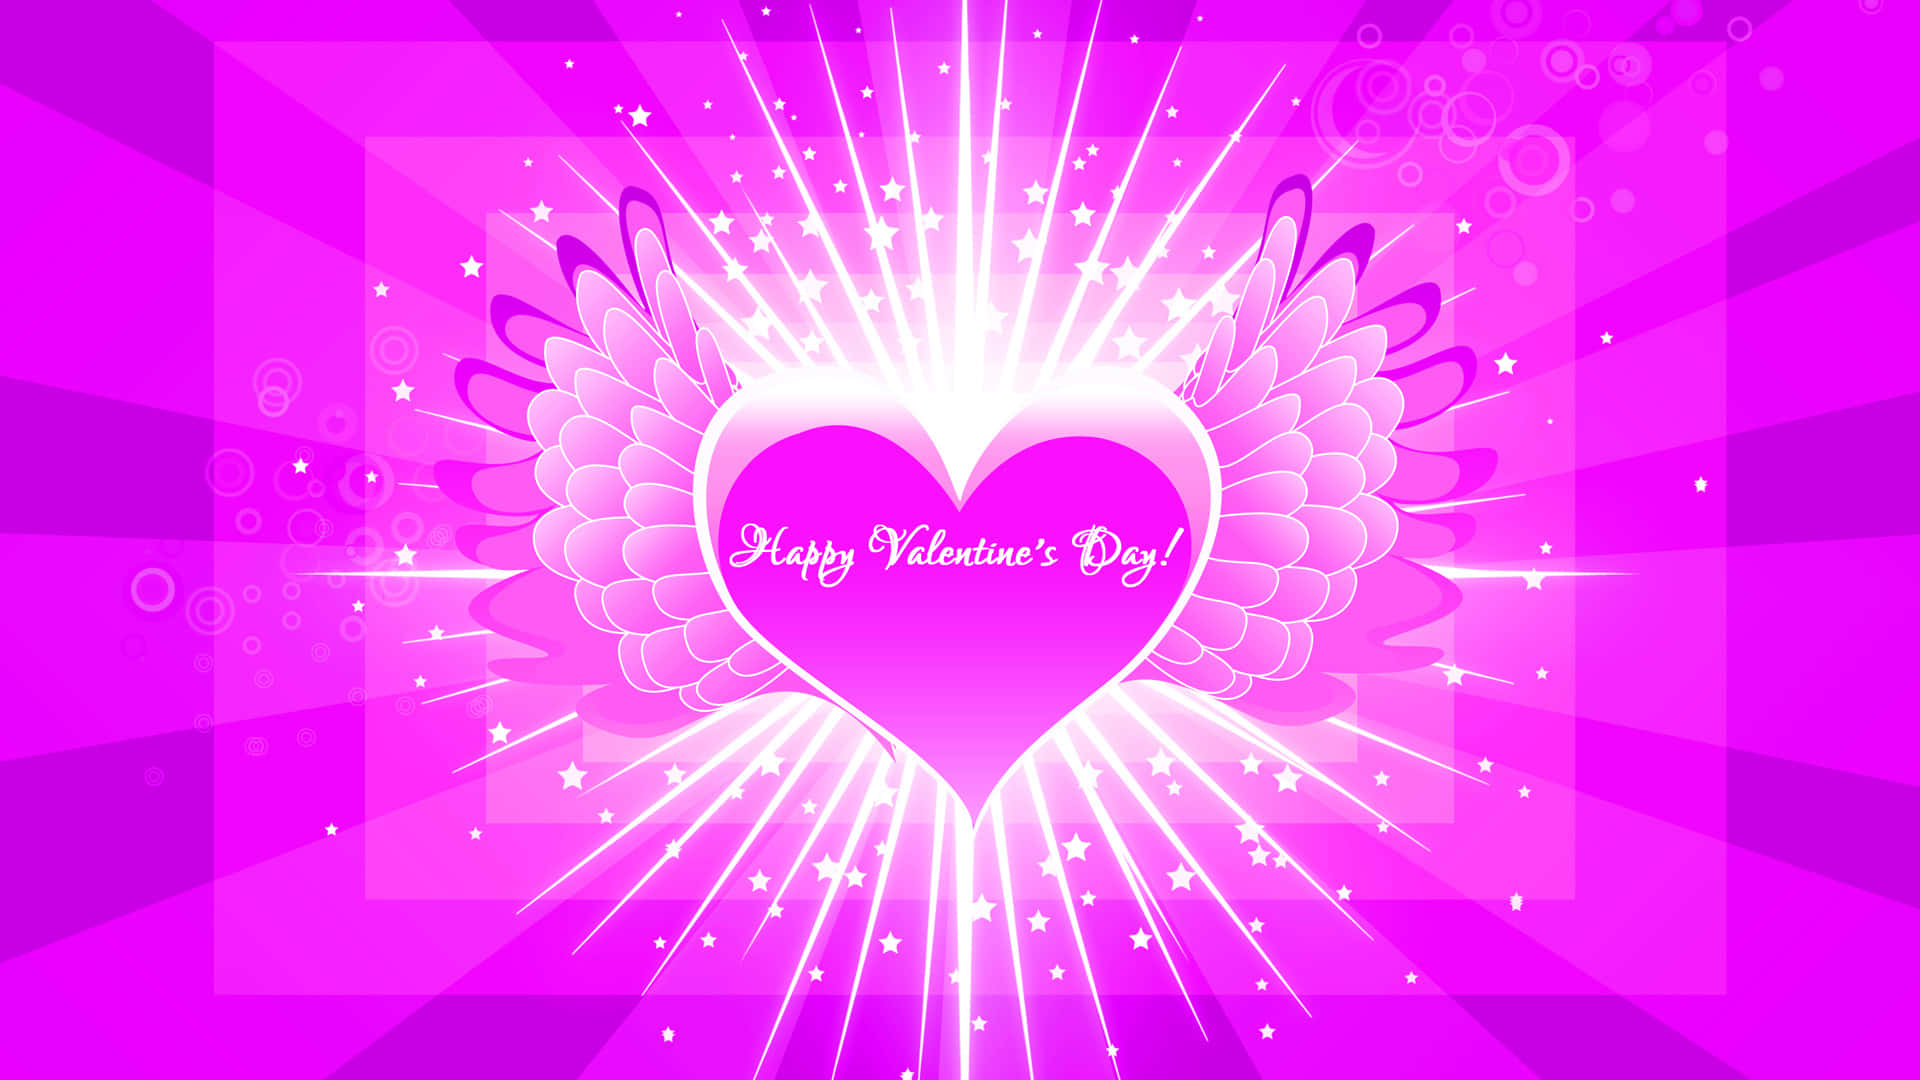 A Pink Background With Wings And A Heart